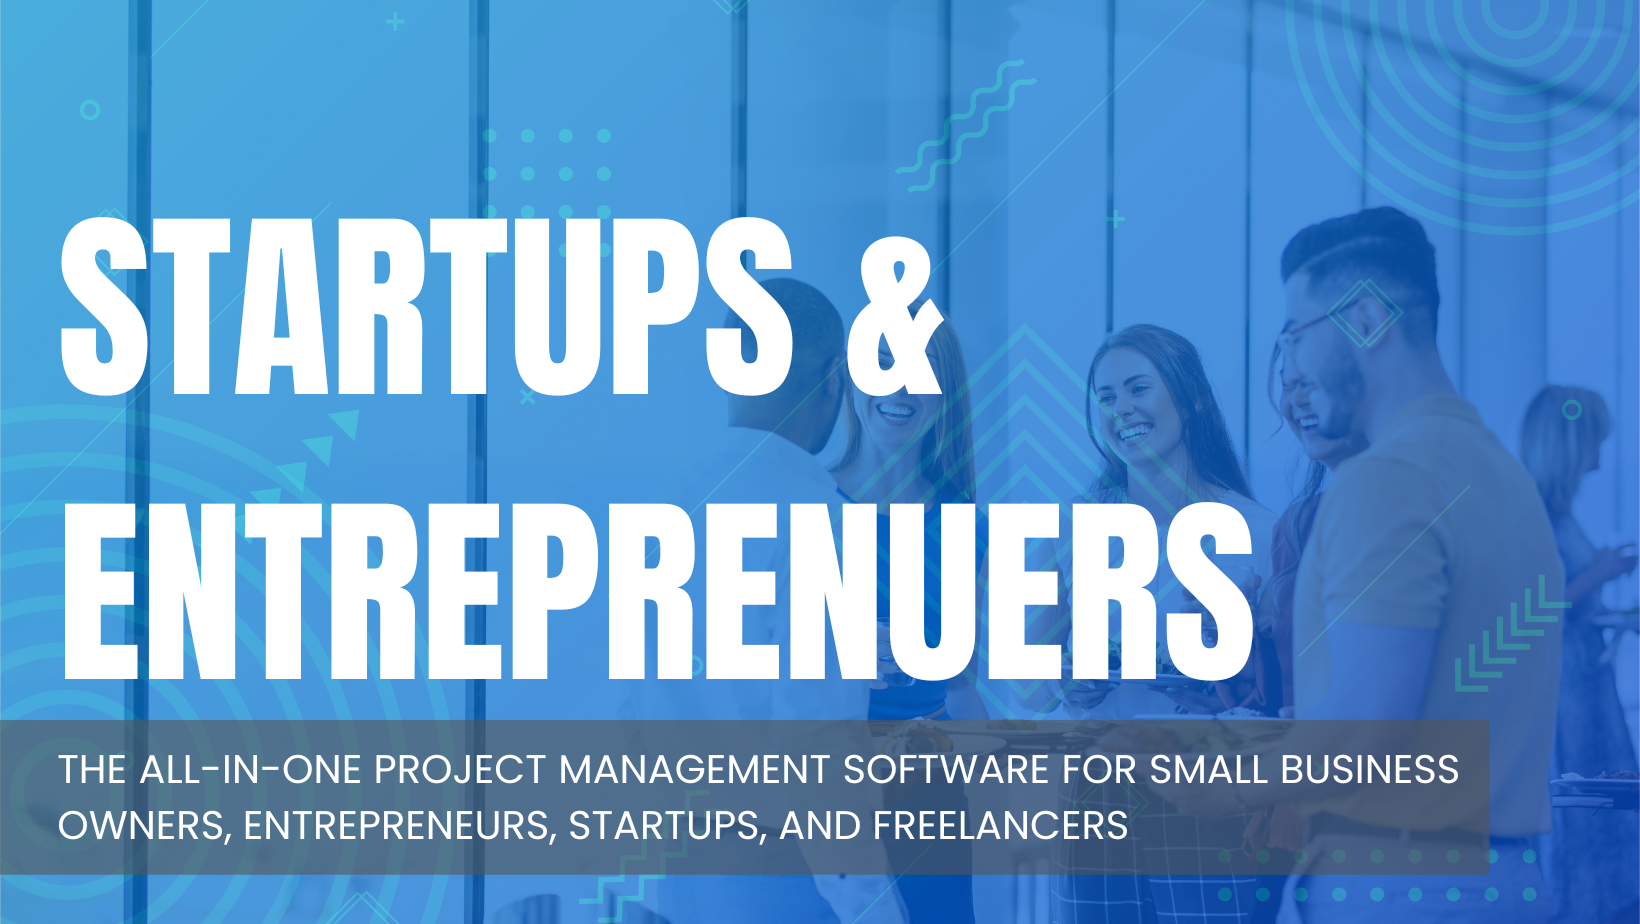 Project Management for Small business and startups, Entrepreneurs and Freelancers